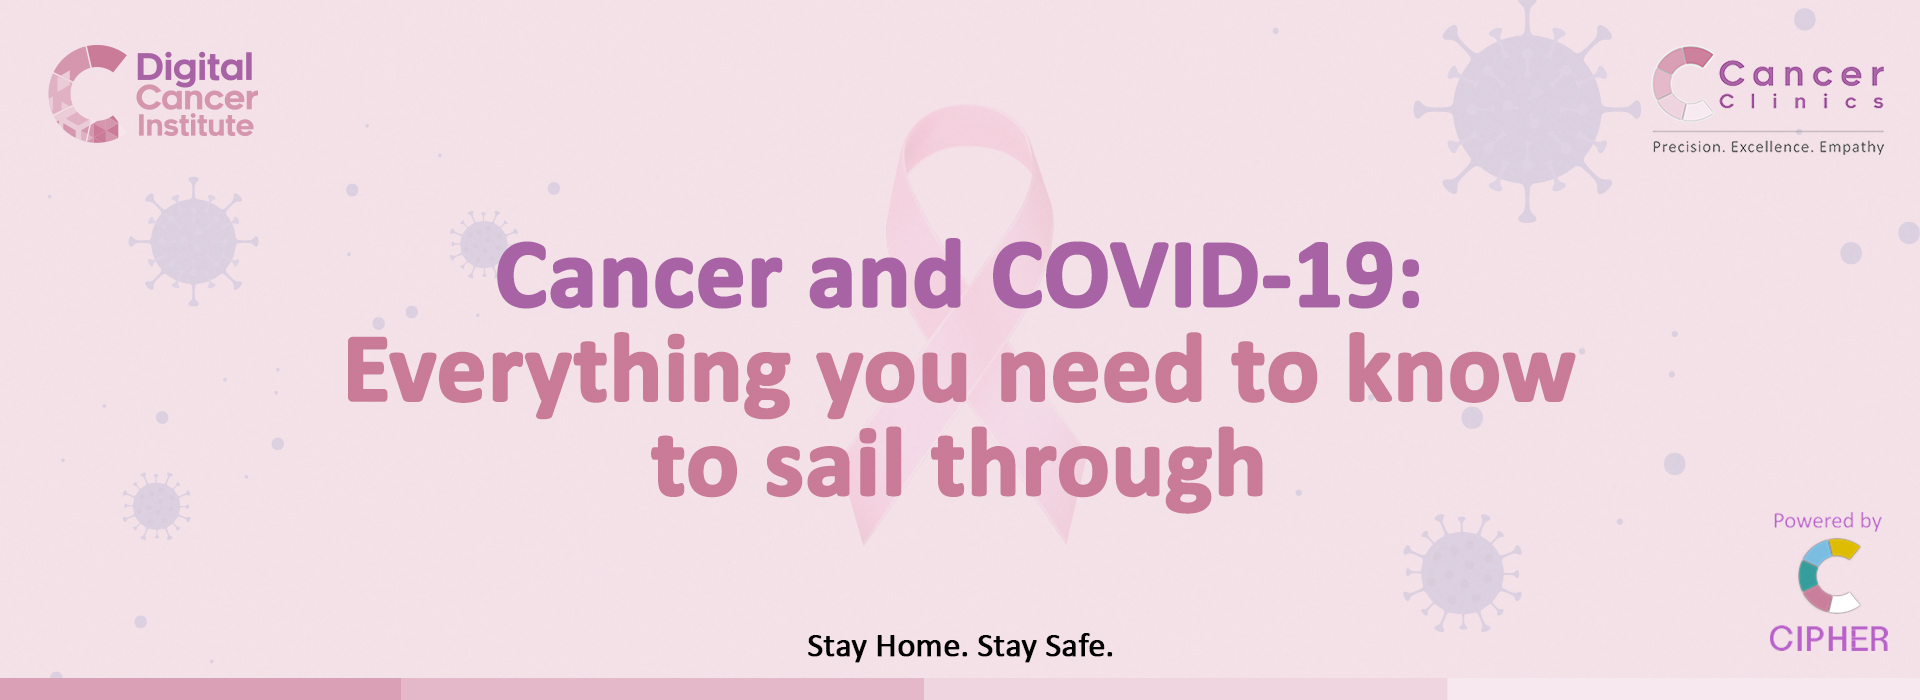 Cancer and COVID-19: Everything you need to know to sail through!